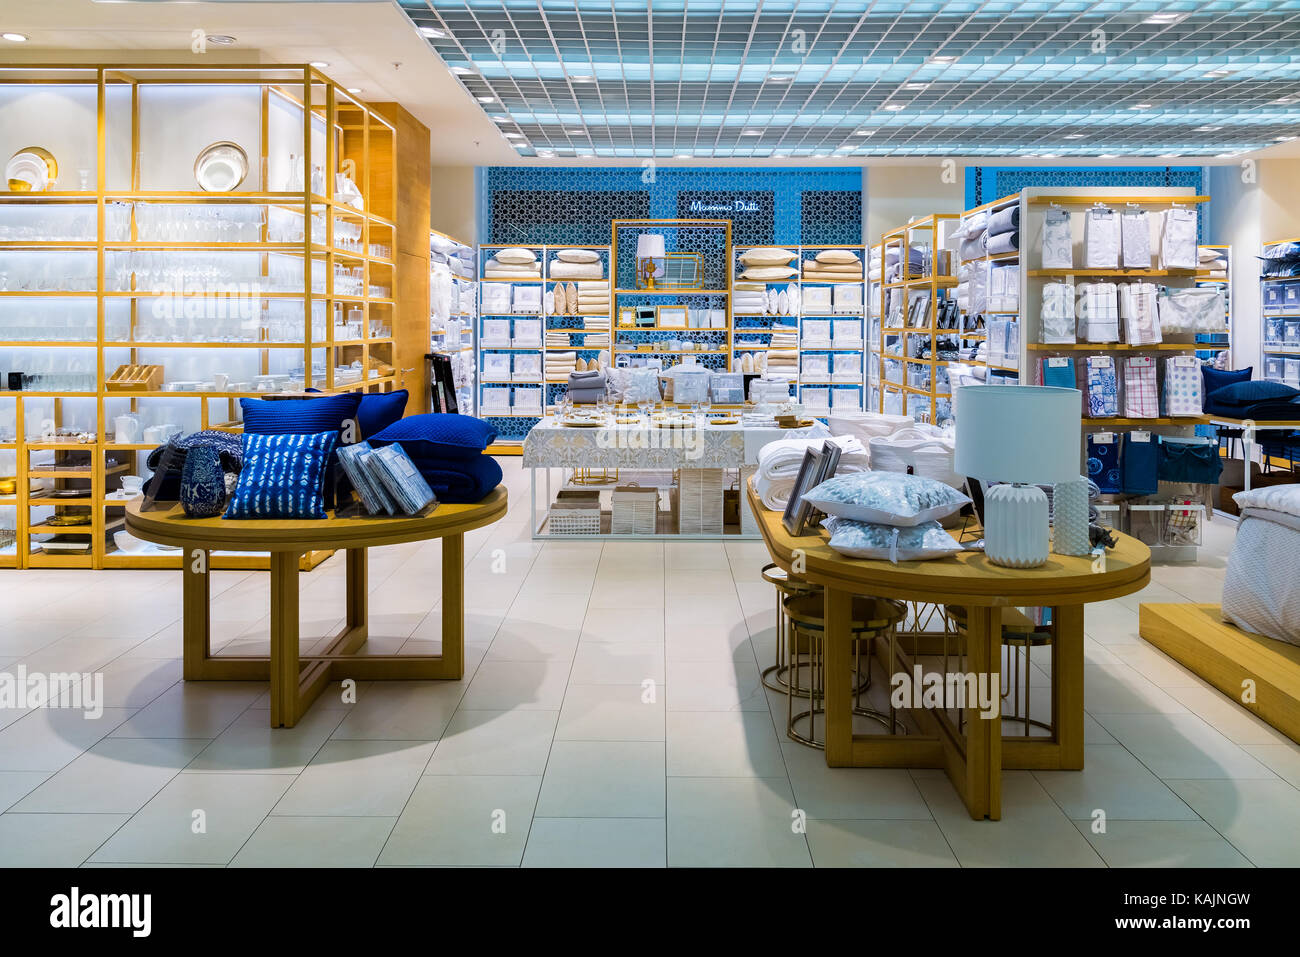 Zara store entrance hi-res stock photography and images - Alamy